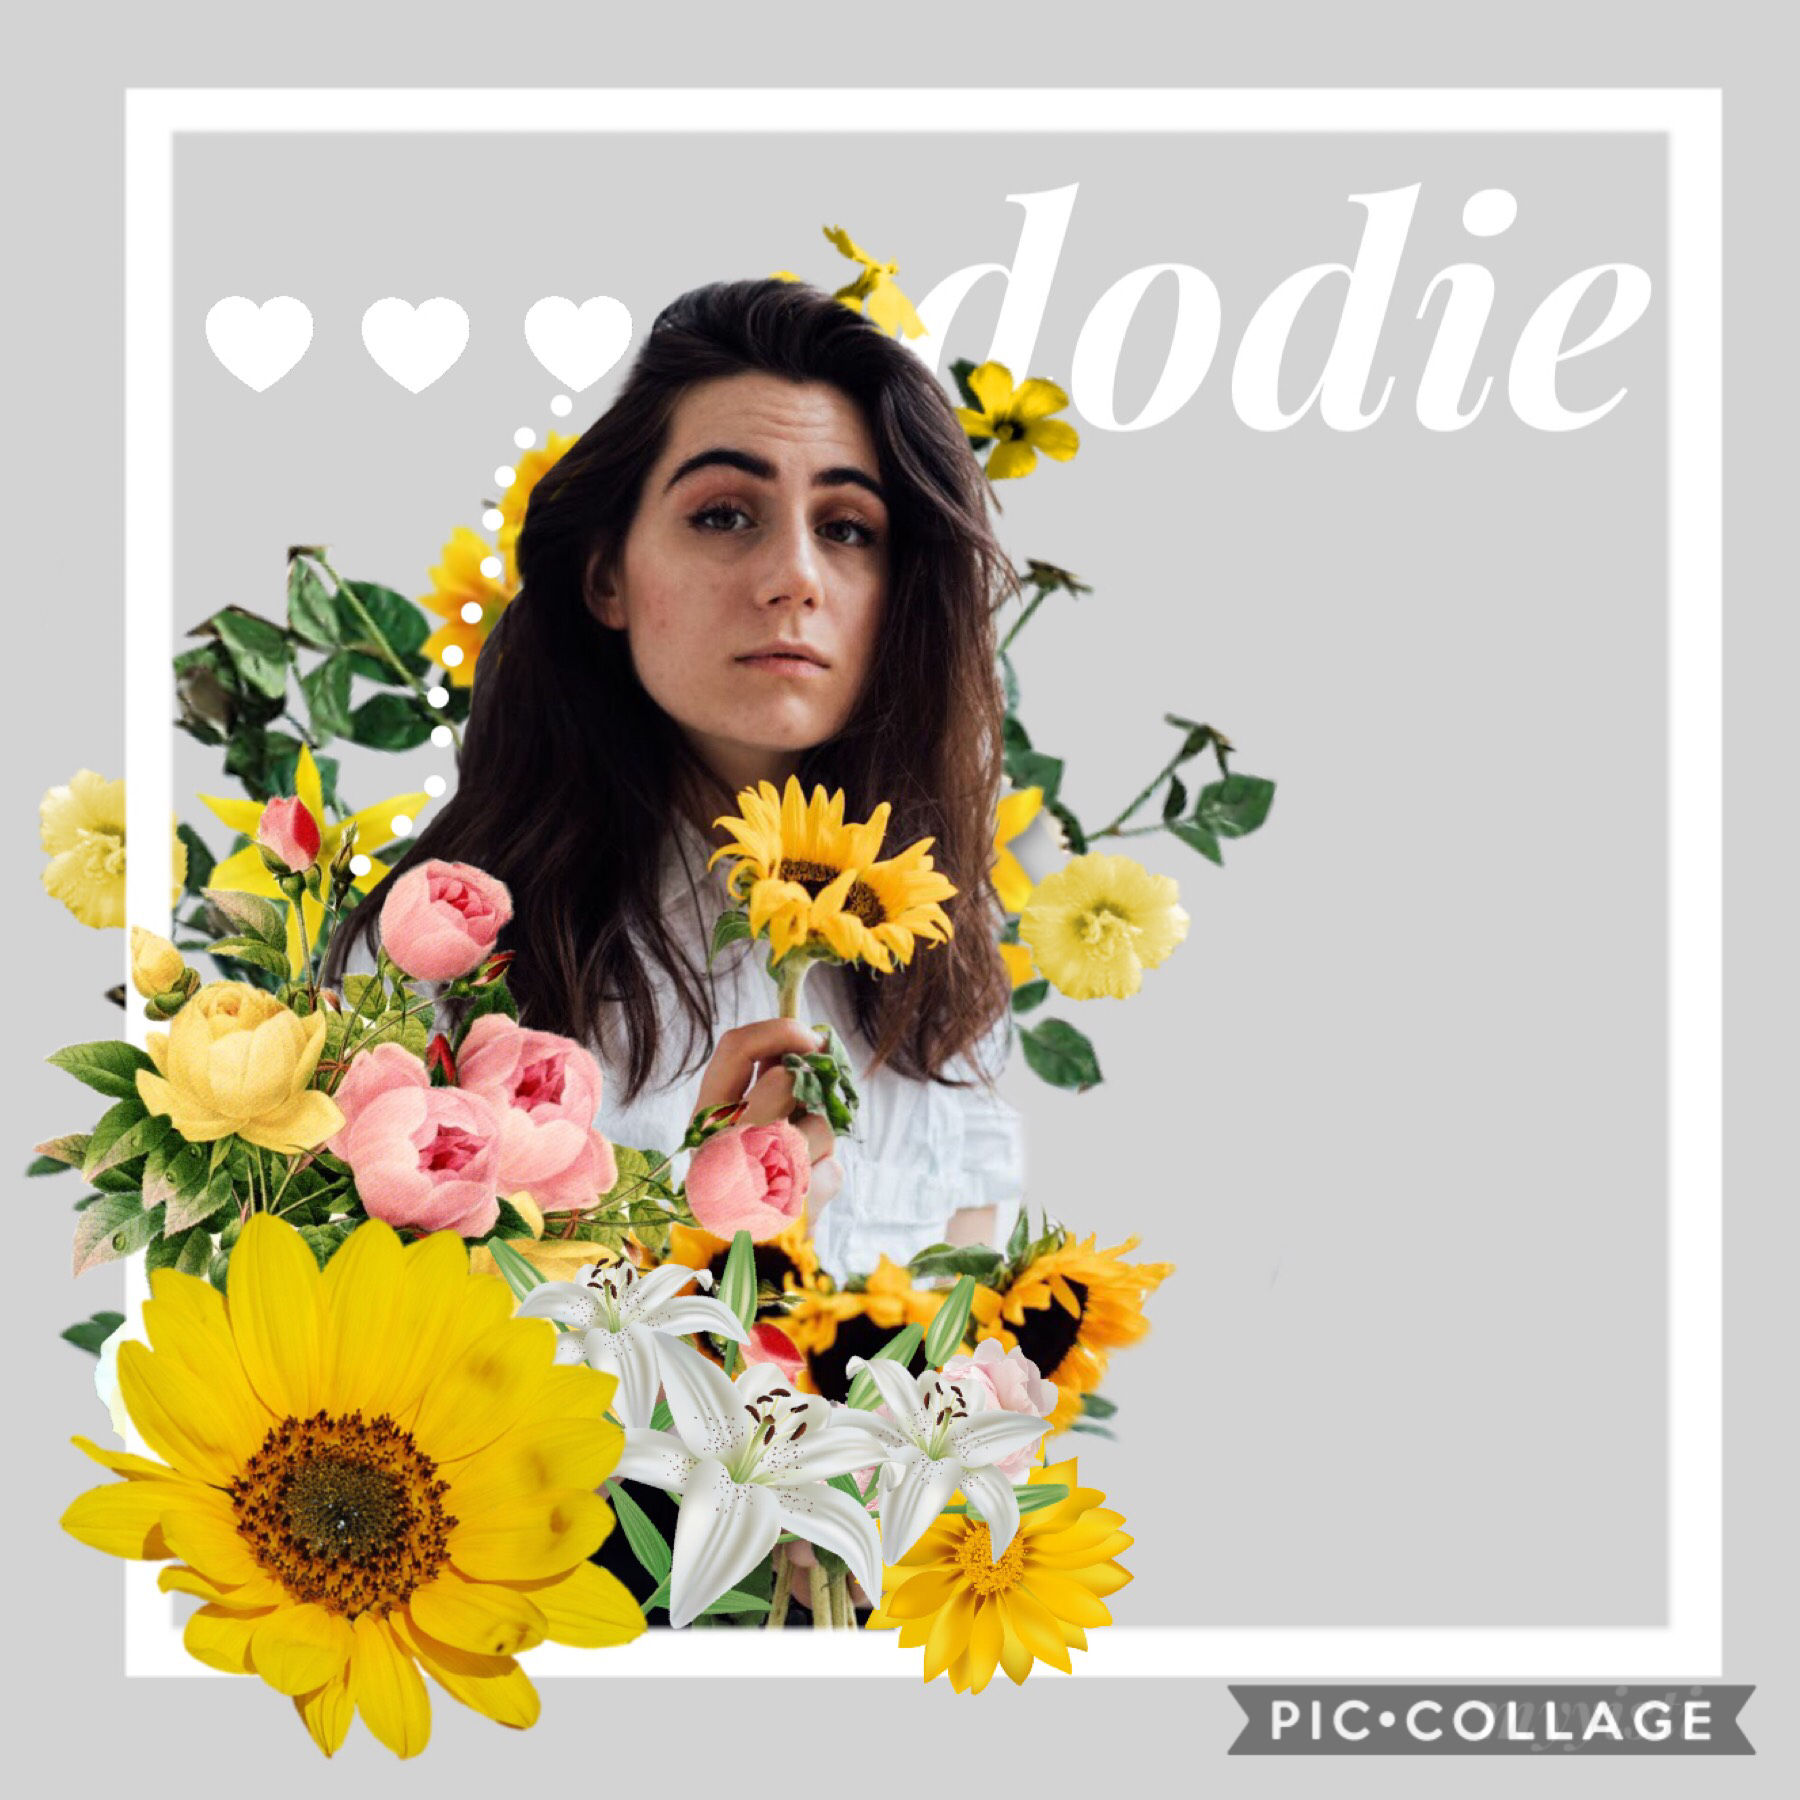 my sis just absolutely loves dodie, so I couldn’t resist doing another collage about her